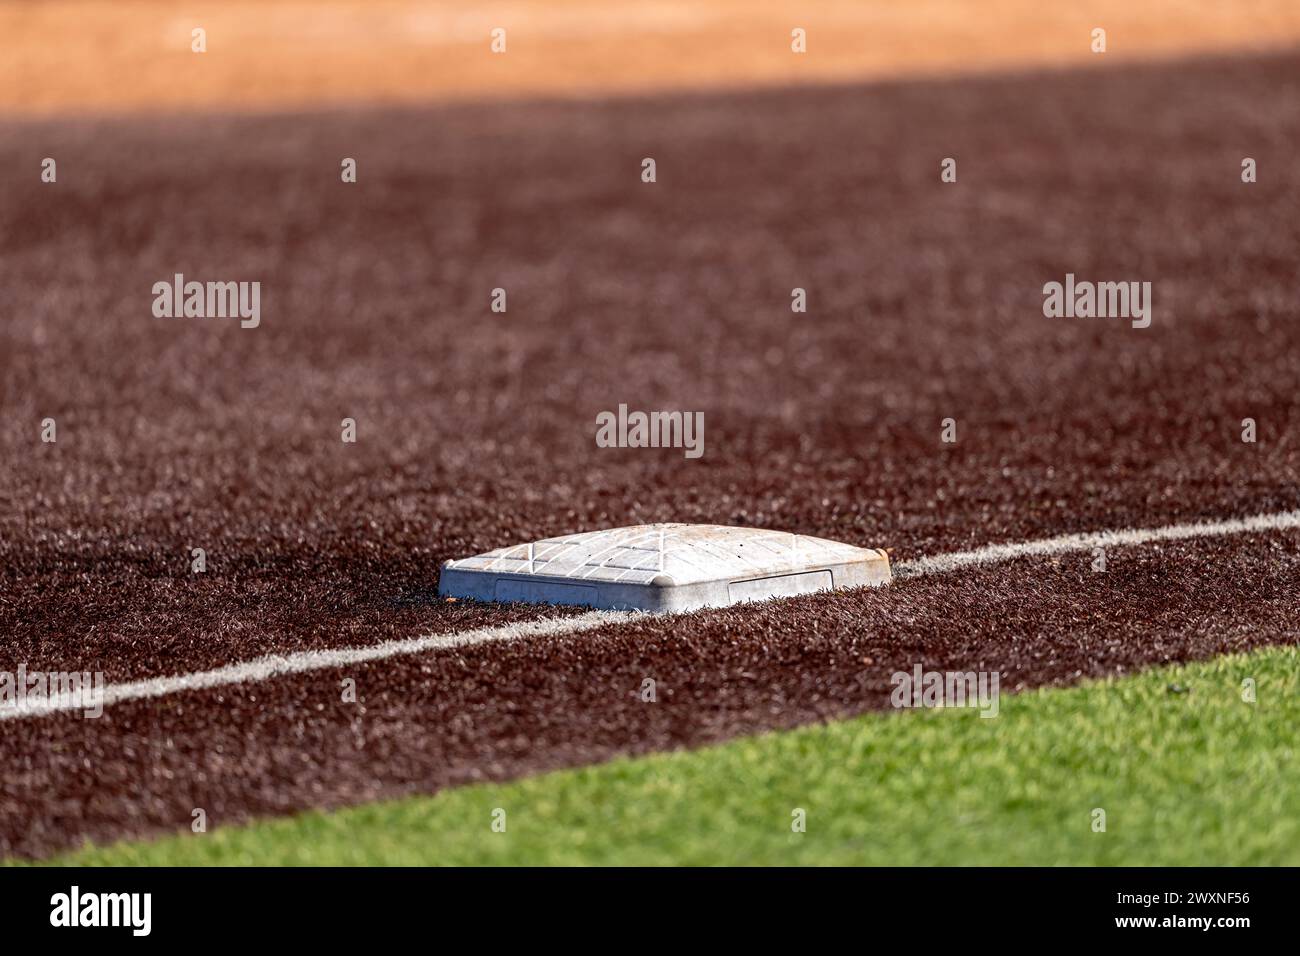 View of high school or college synthetic turf softball field third base. Stock Photo